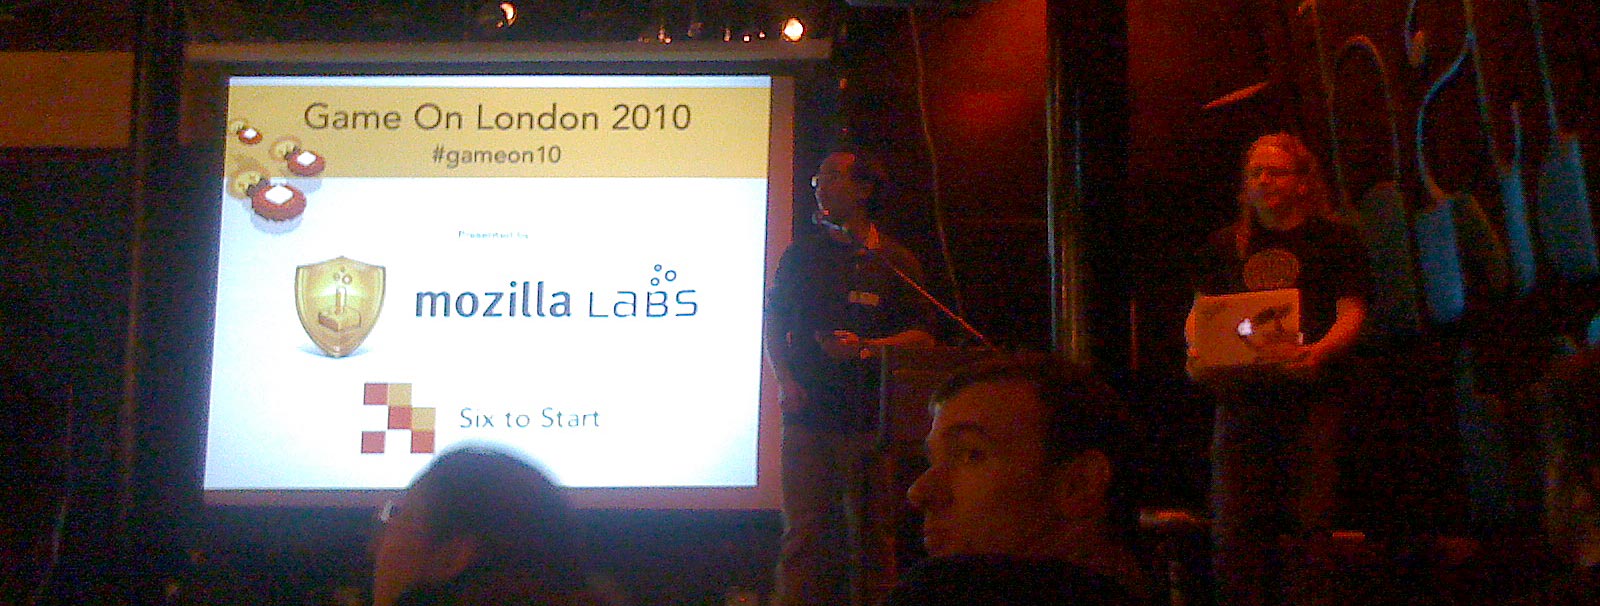 Mozilla Labs Open Gaming special event